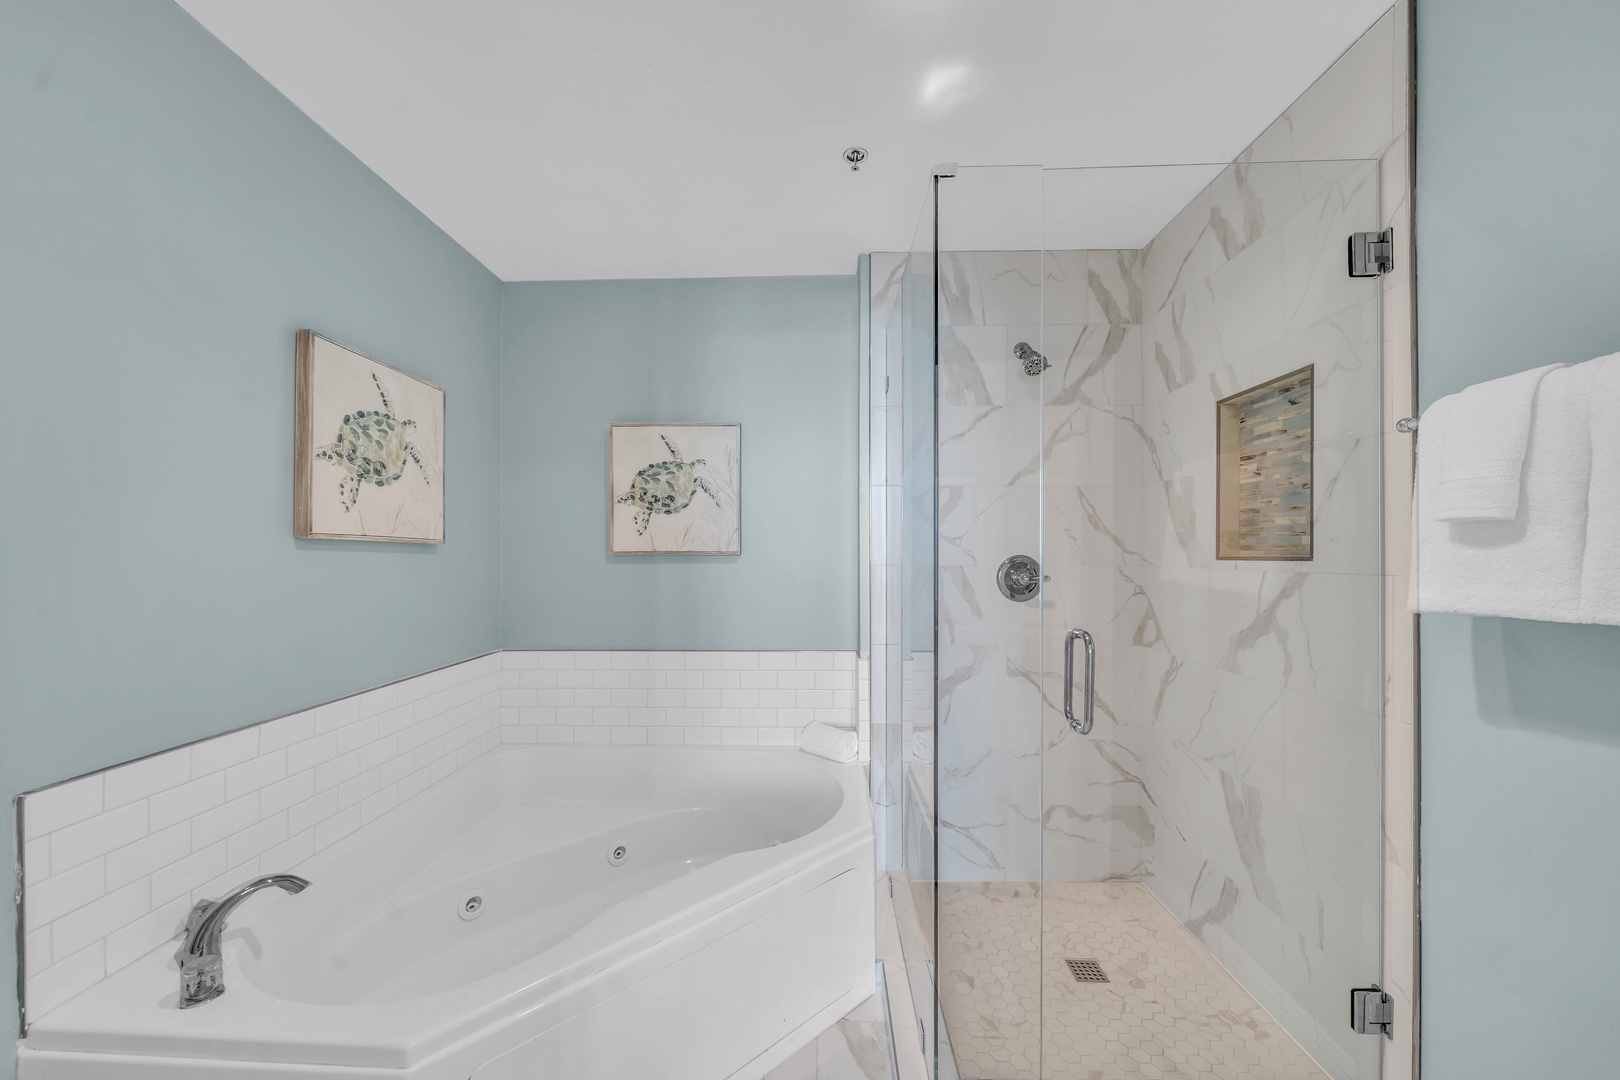 The Primary Bedroom features a private bathroom with a Jacuzzi Tub and a separate Glass Shower.